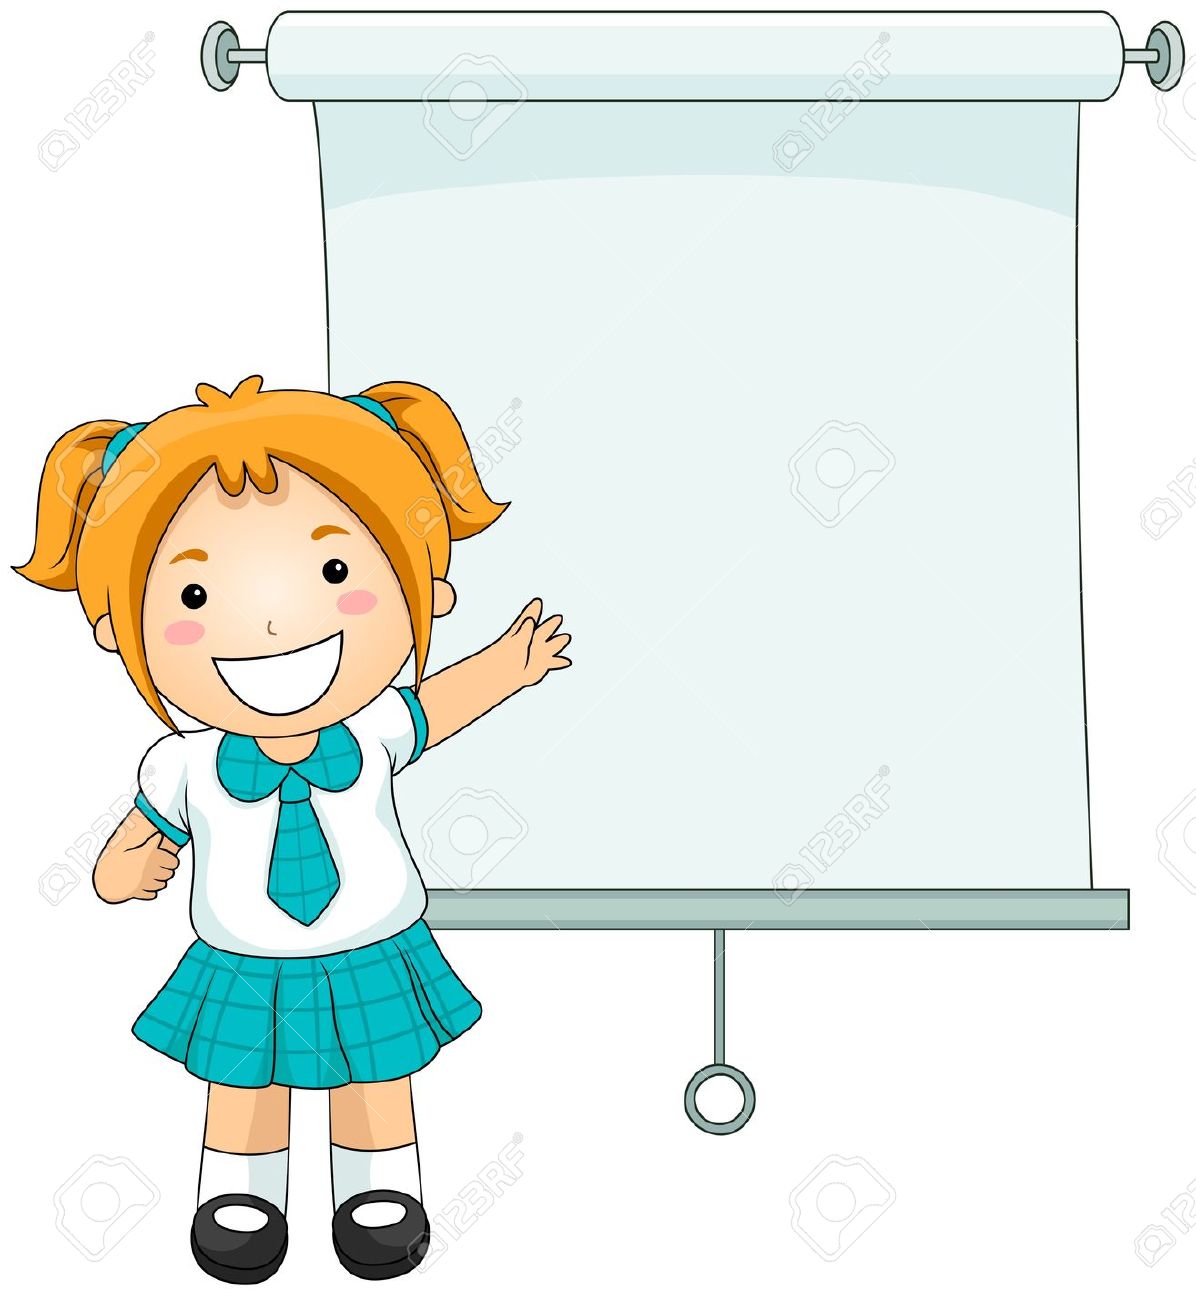 Kid clipart presentation. Group cliparts free download